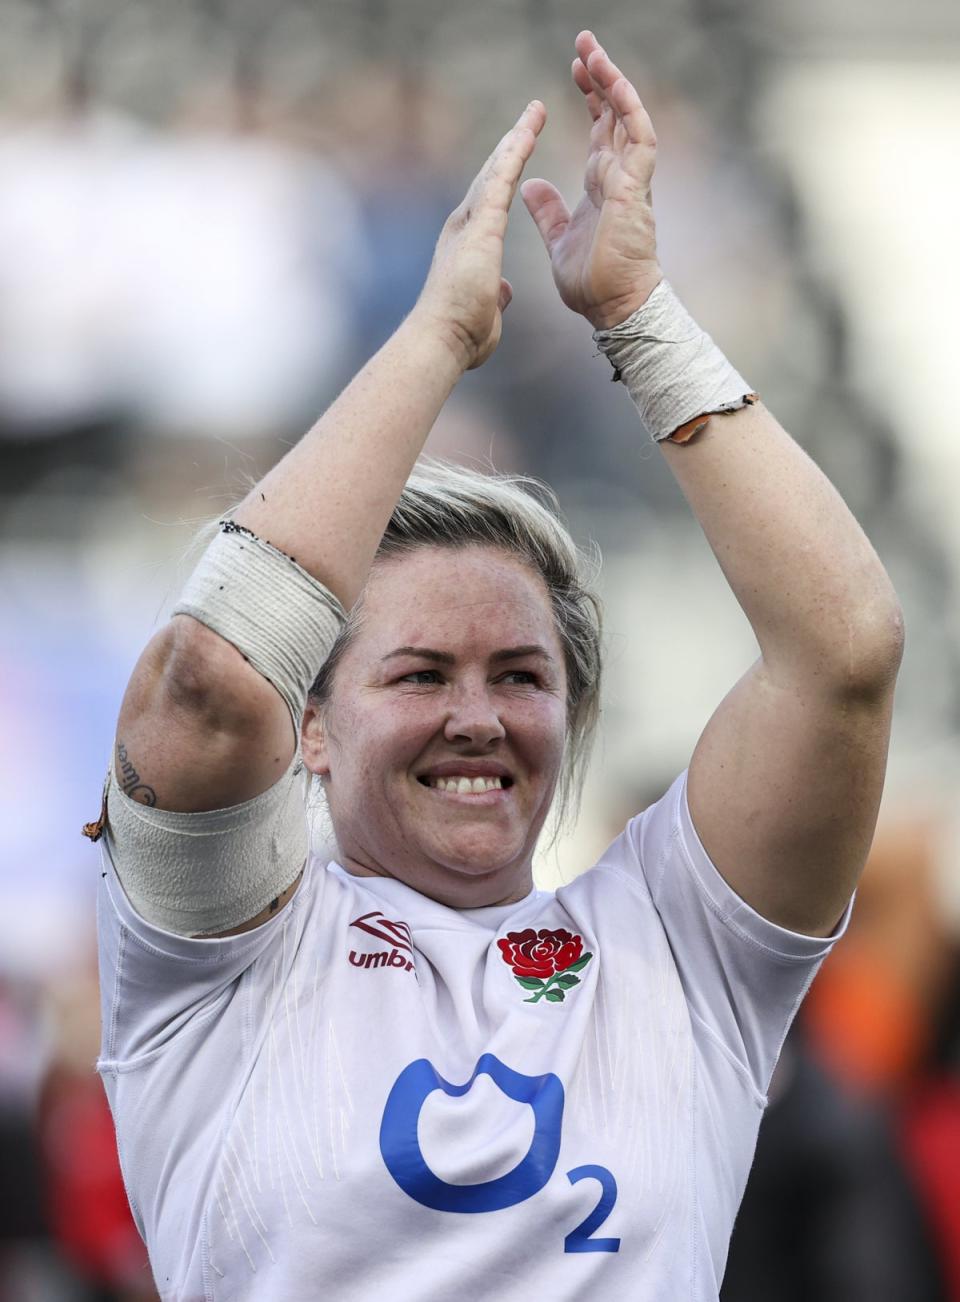 New role: Marlie Packer will come off the bench when England face Scotland (Ben Whitley/PA Wire)